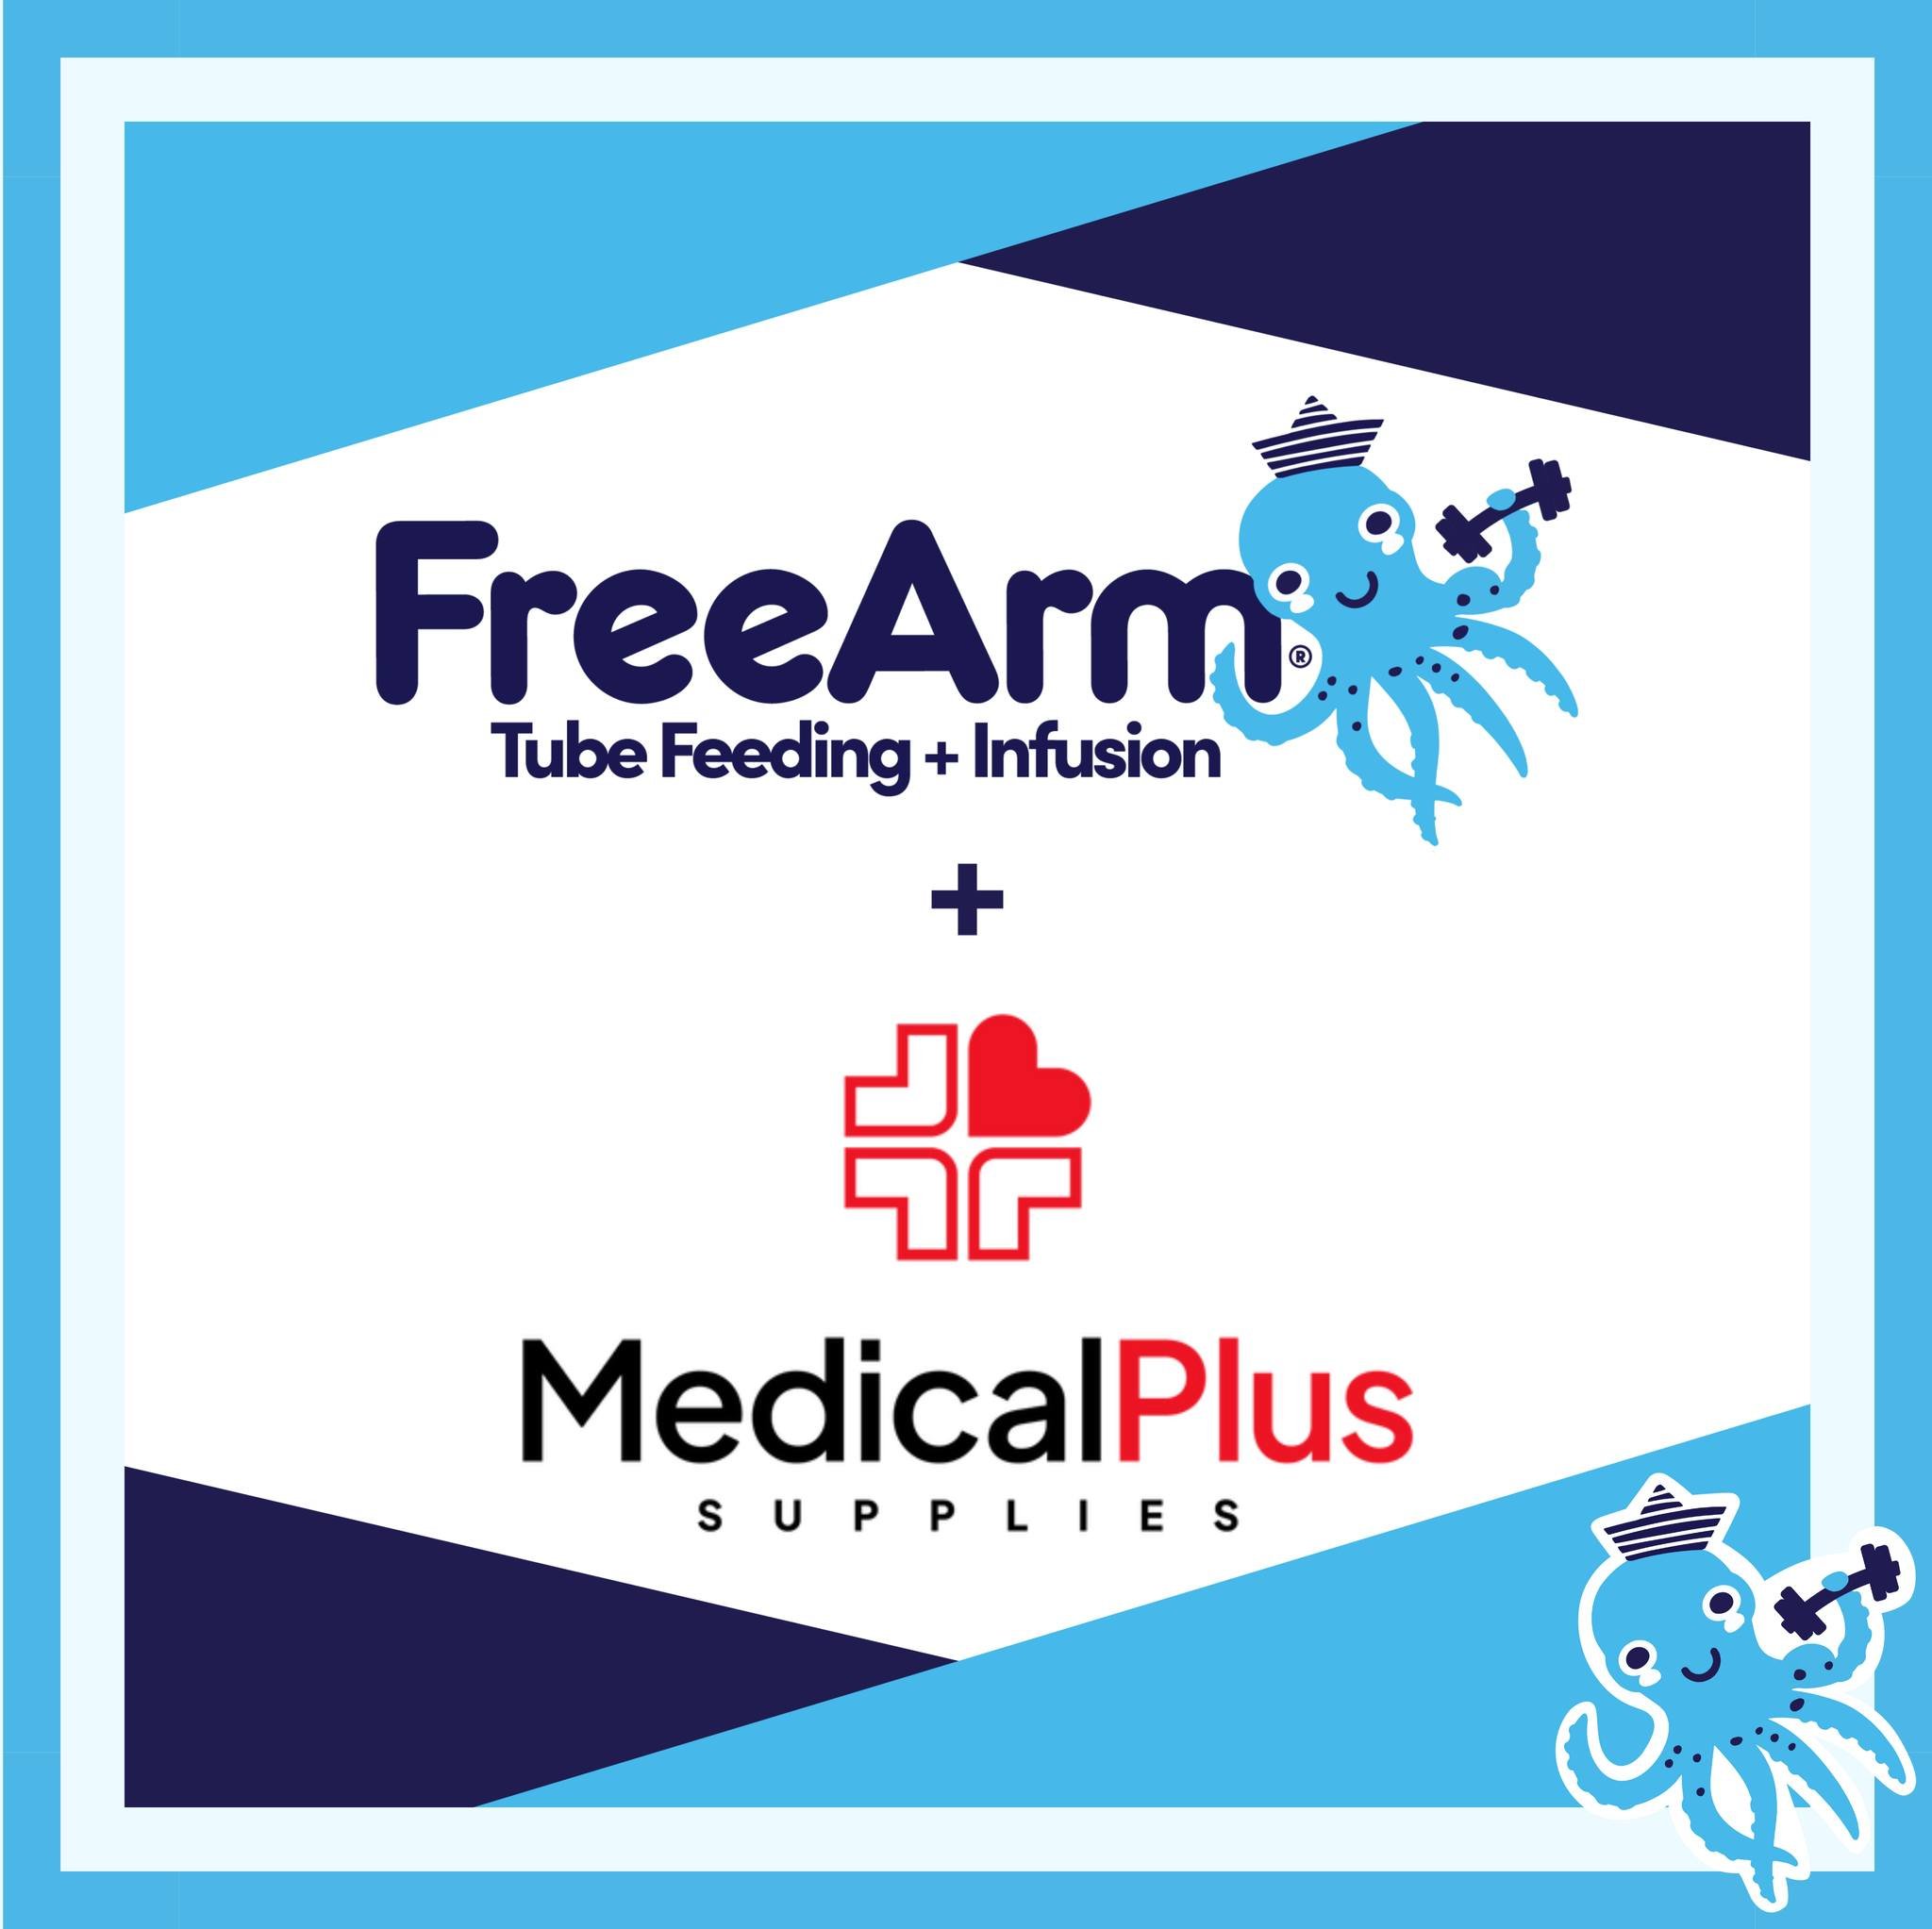 Medical Plus Supplies loves their Texas patients and are happy to provide easier tube feeding solutions!
❤️❤️❤️
Are you a Medical Plus Supplies customer in TX? Call them today at 1-800-298-3948 to see if a FreeArm Muscle can be billed to your insuran